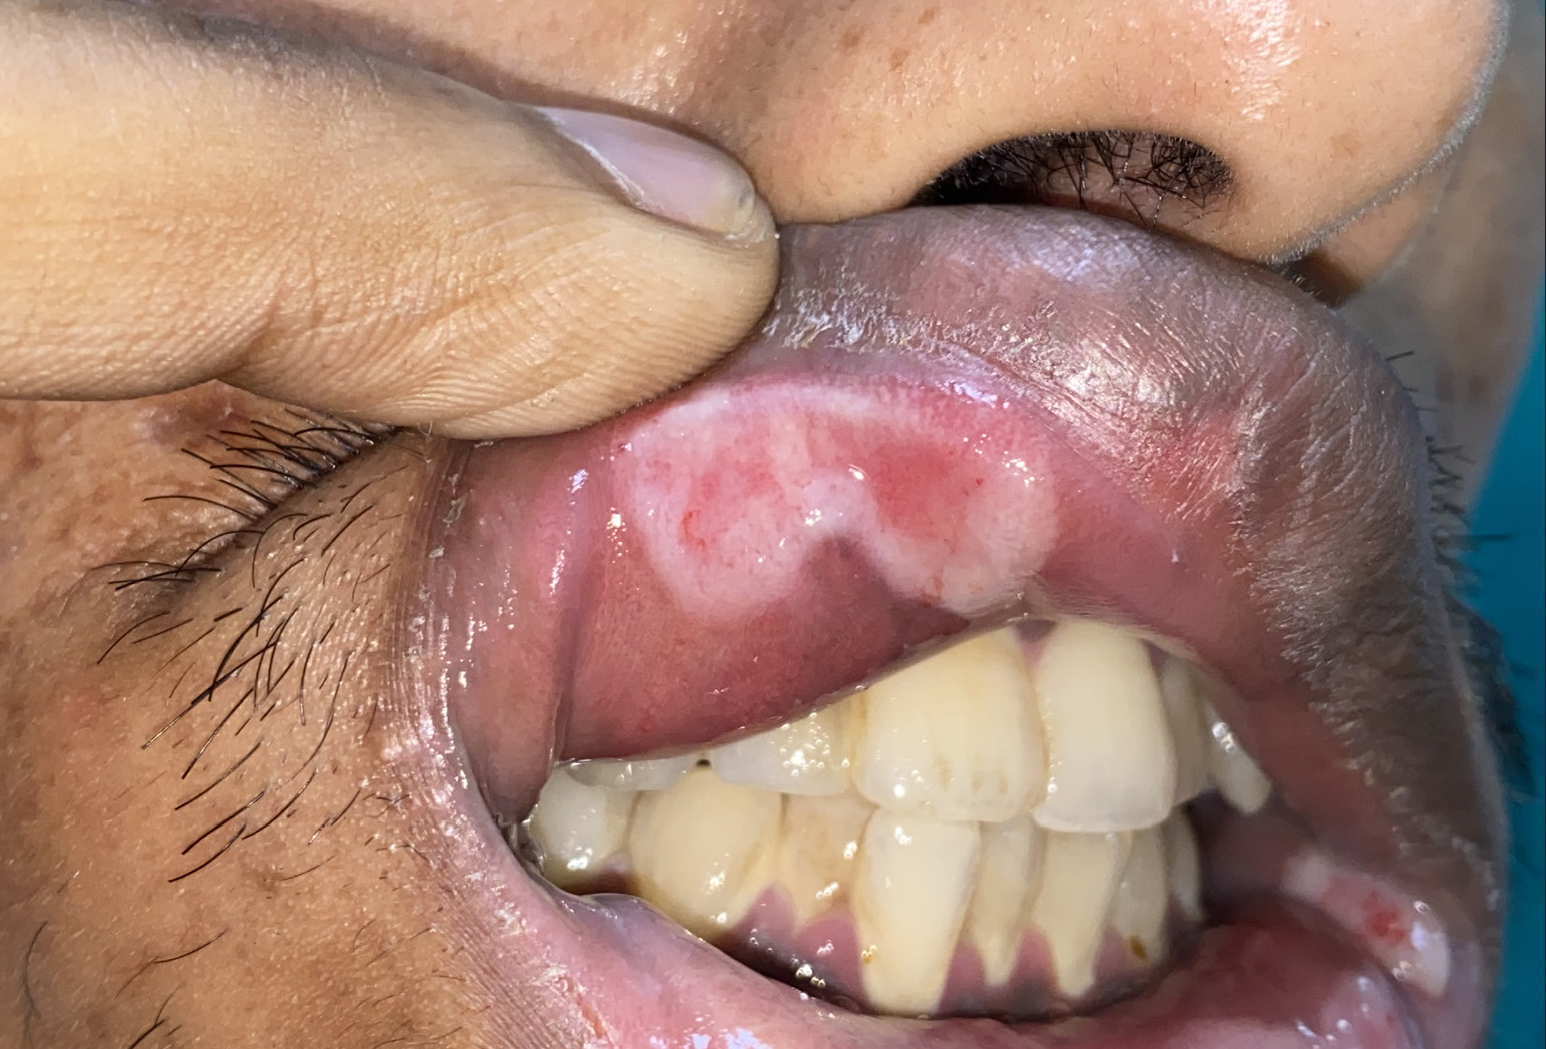 Erythematous to whitish tumid plaque seen on the upper labial mucosa and split papule seen on the left angle of mouth.